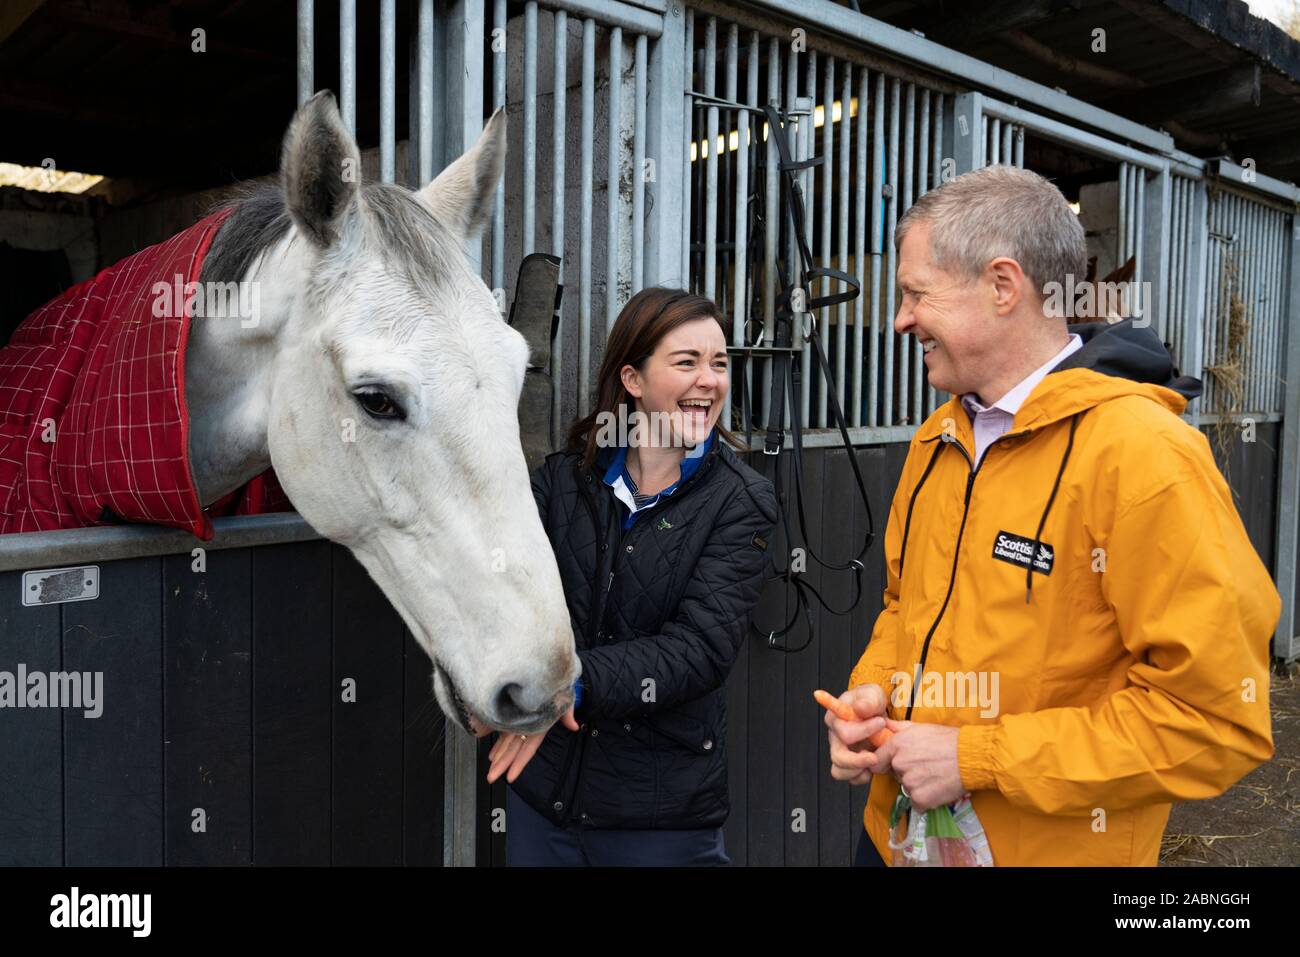 Lasswade, Scotland, UK. 28th November 2019. Liberal Democrats  highlight “two horse race in many seats” at Lasswade horse riding school. Scottish Liberal Democrat Leader Willie Rennie and candidate for Berwickshire, Roxburgh & Selkirk, Jenny Marr, visited the Lasswade riding centre to highlight the Lib Dems’ place as the lead contender in many seats across Scotland. Iain Masterton/Alamy Live News. Stock Photo